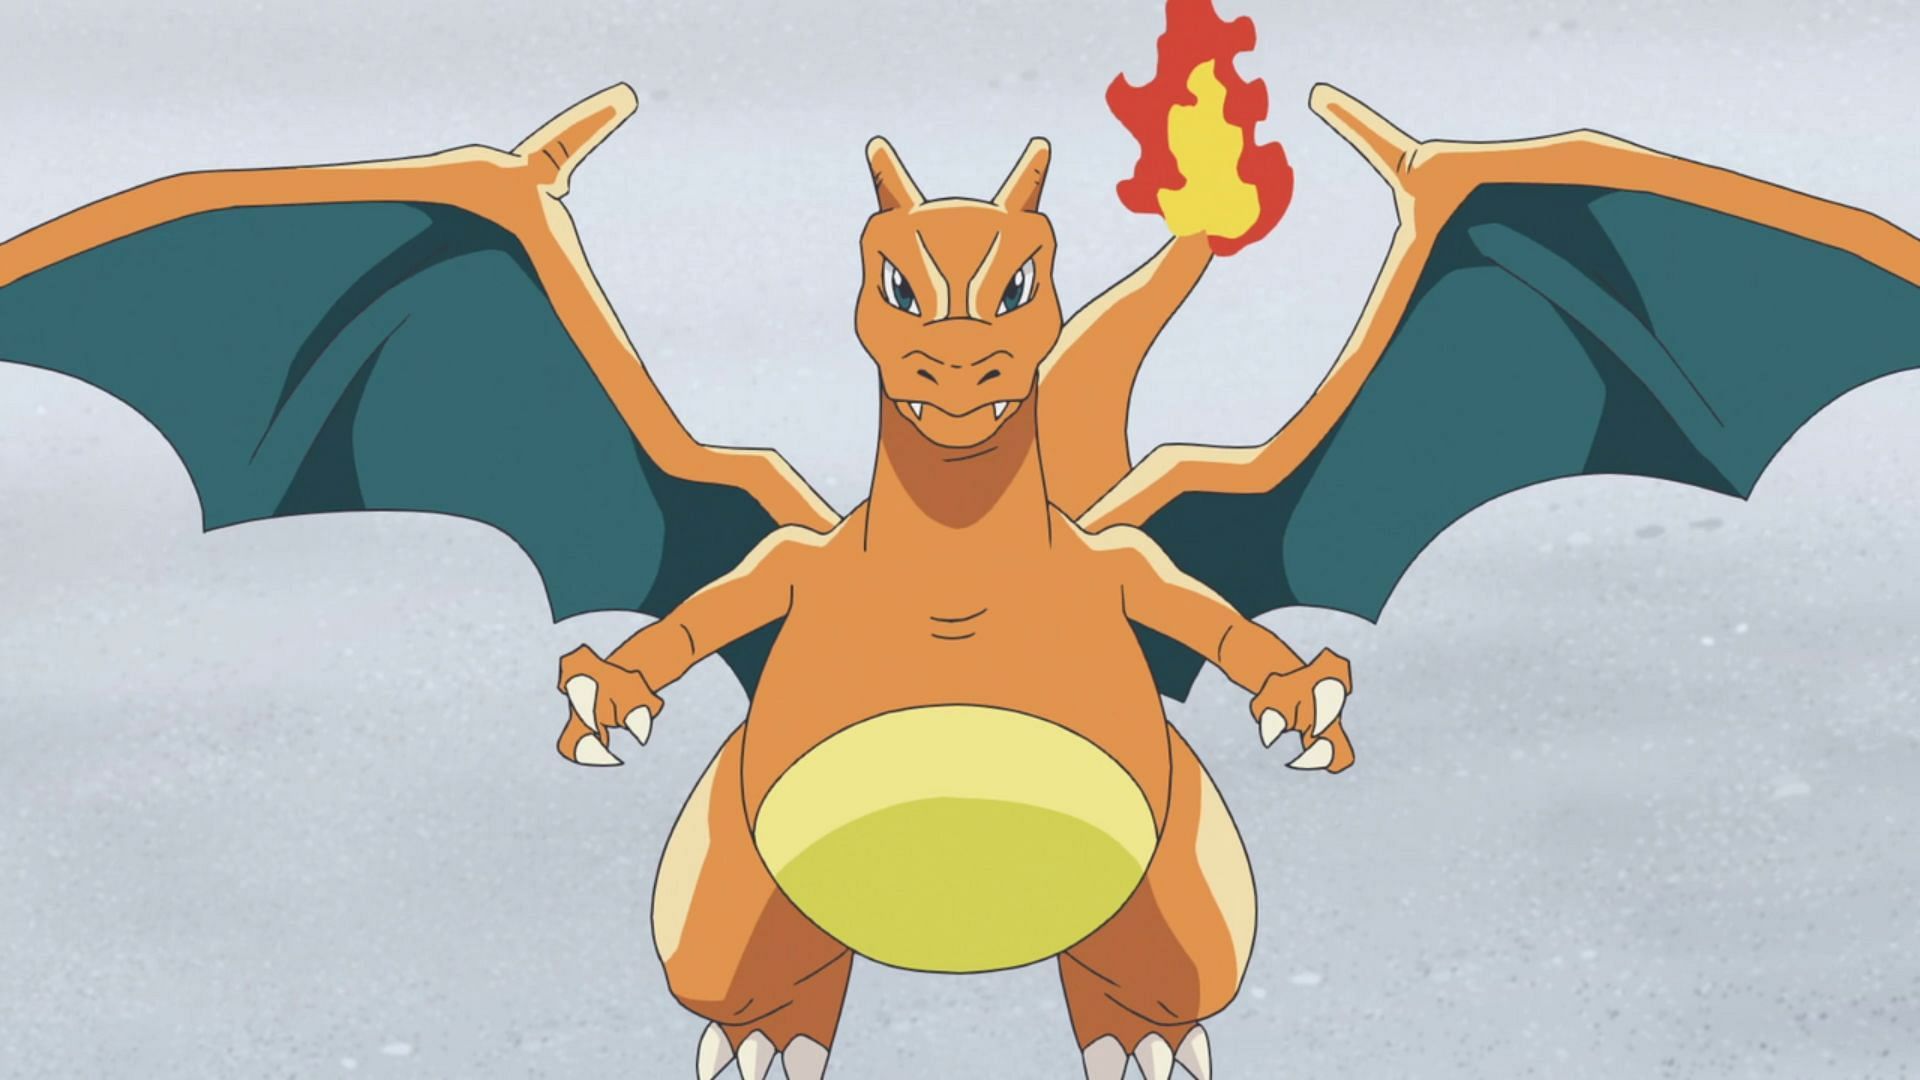 006 Charizard used Dragon Claw and Flamethrower!